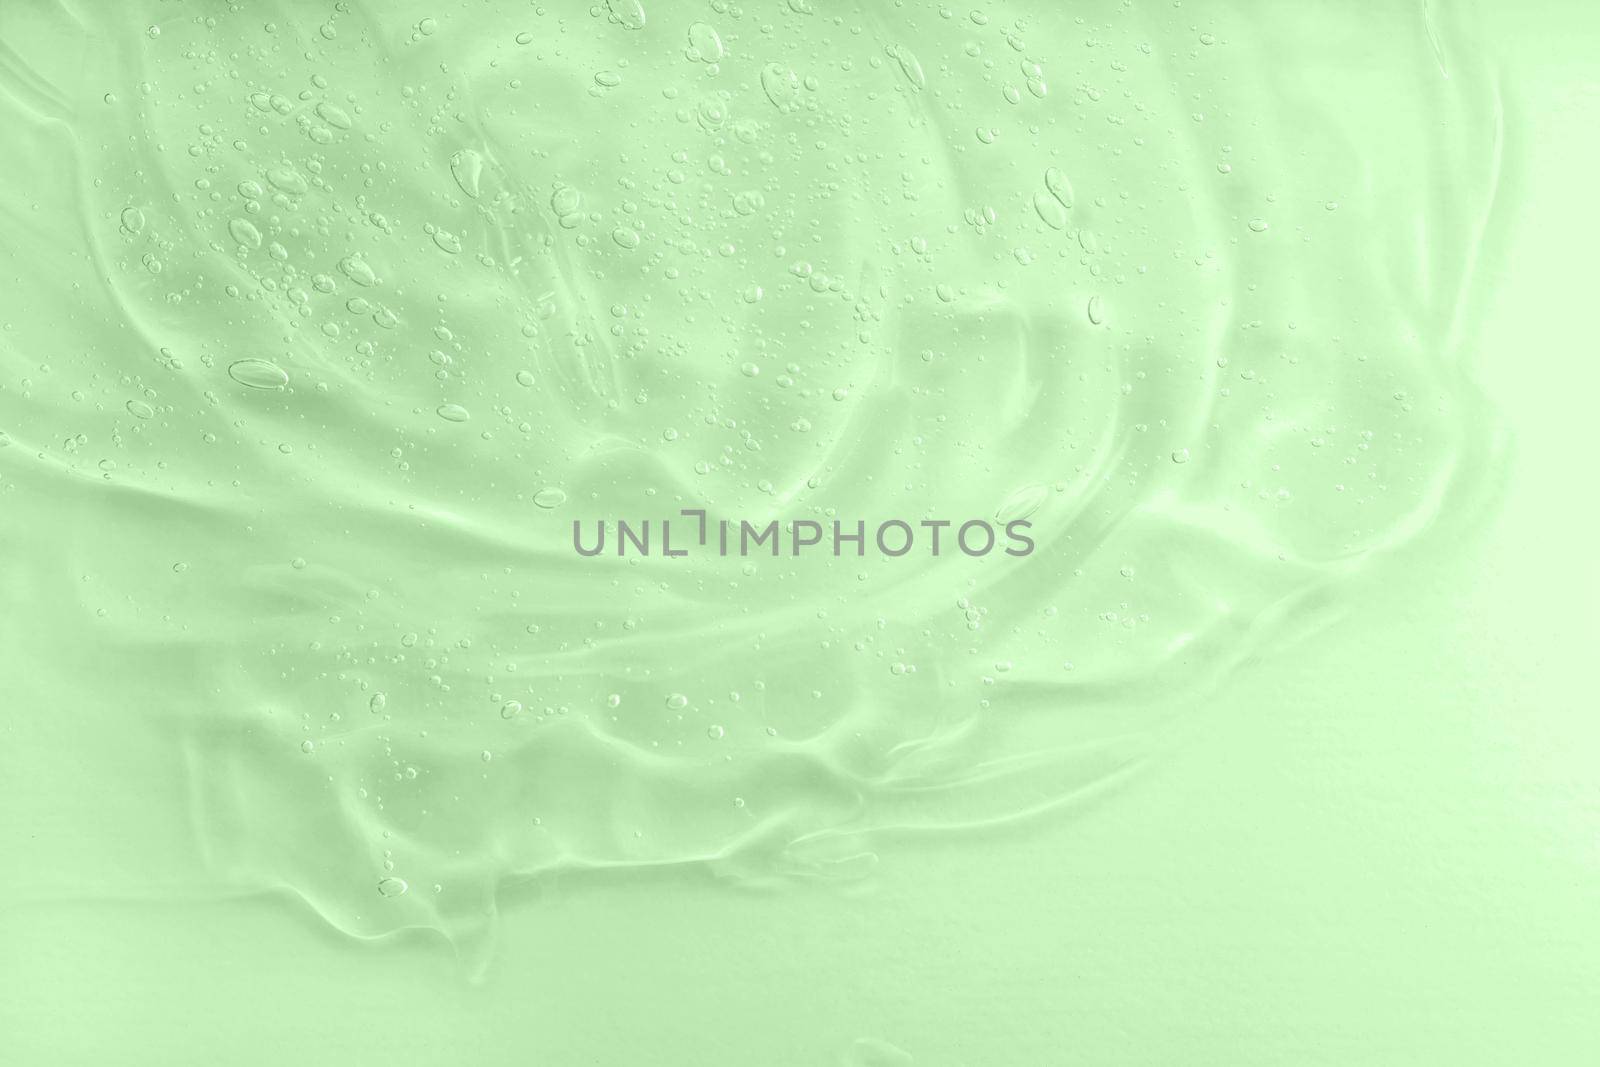 Aloe vera cosmetic gel texture with bubbles background. Skincare moisturizing product. Liquid green oil smudge. The concept of natural cosmetics. Hyaluronic acid clear serum sample. by photolime